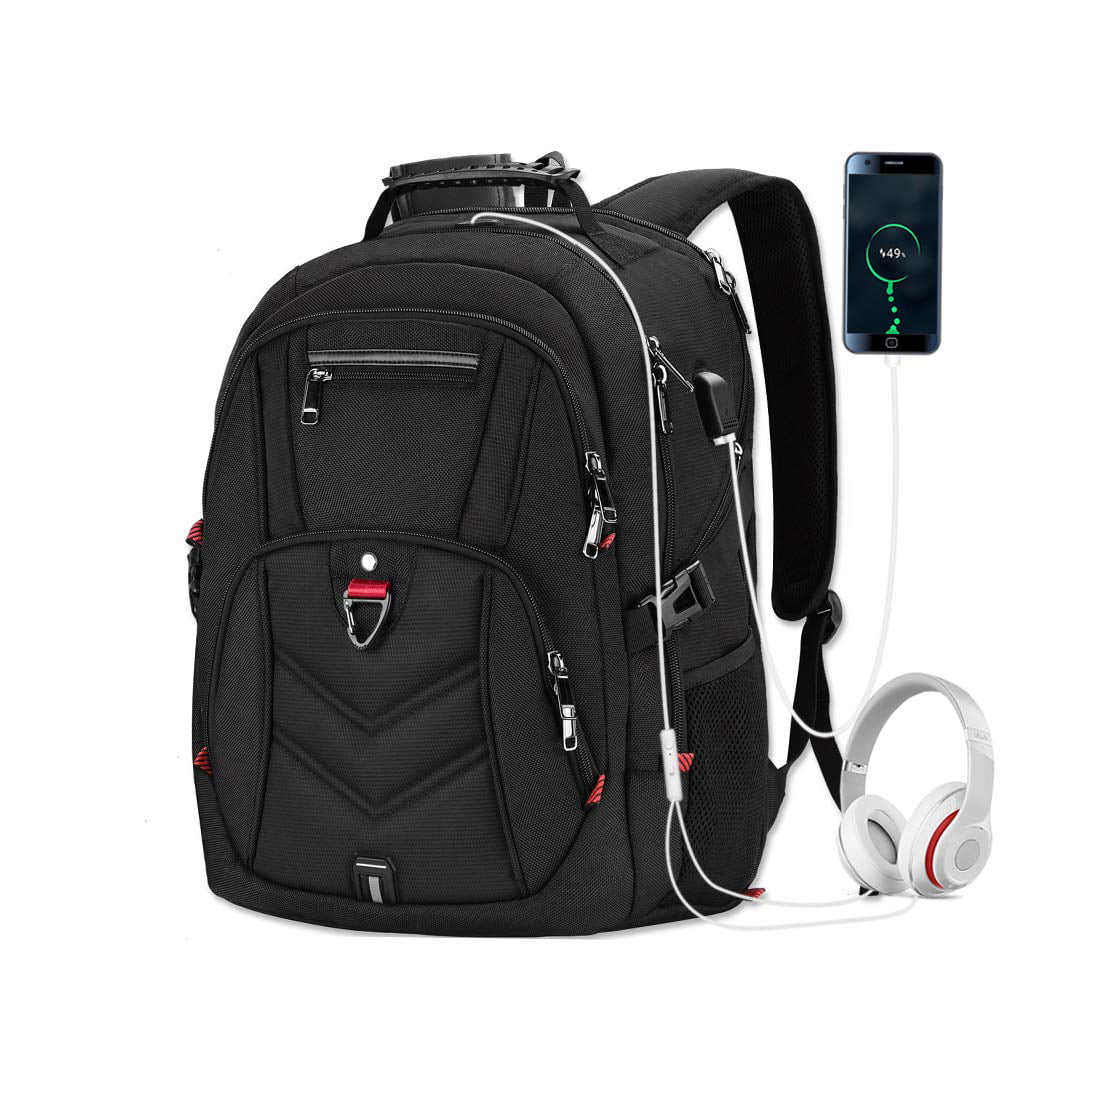 Abstract Watermelon Laptop Backpack 17 Inch Business Travel Backpacks for Men Women Adjustable Shoulder Strap with USB Charging Port Black Mens and Womens Business